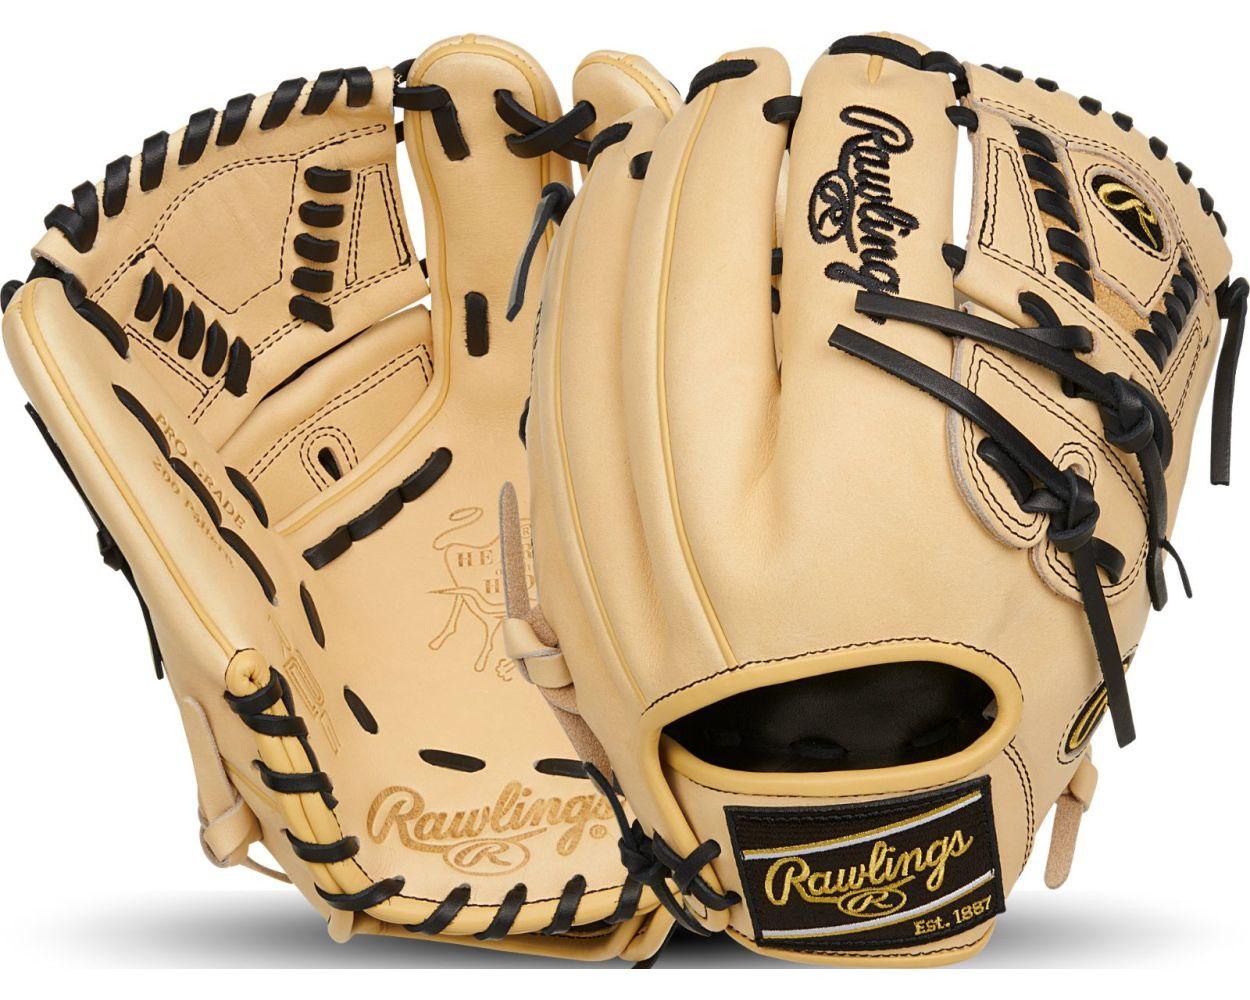 The Best Pitching Gloves for Control and Comfort: Coach's Choice